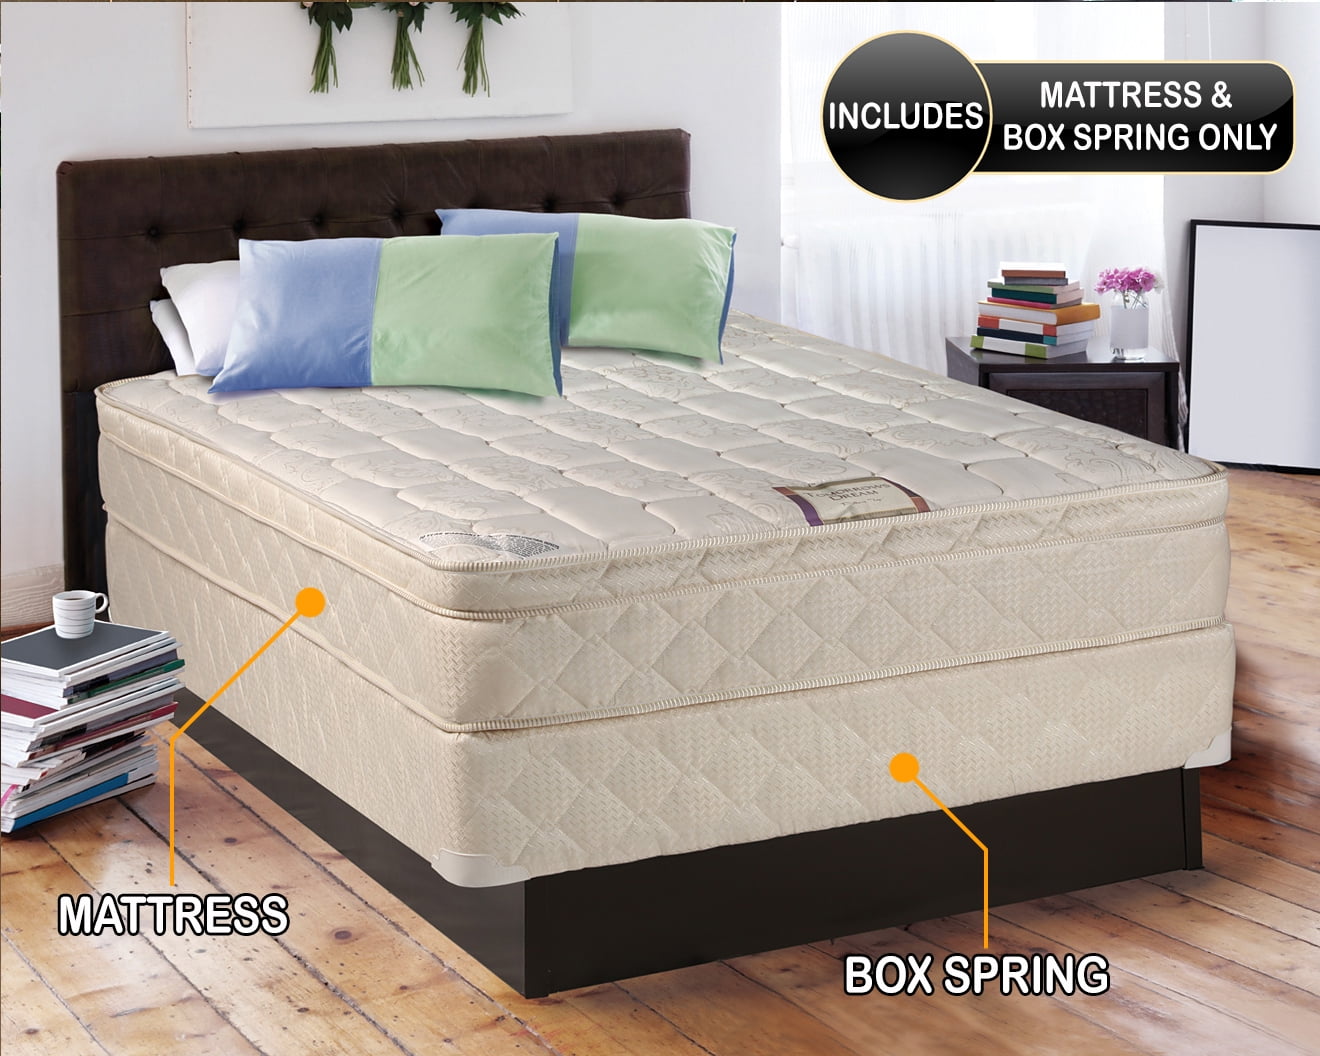 queen mattress and box spring set costs